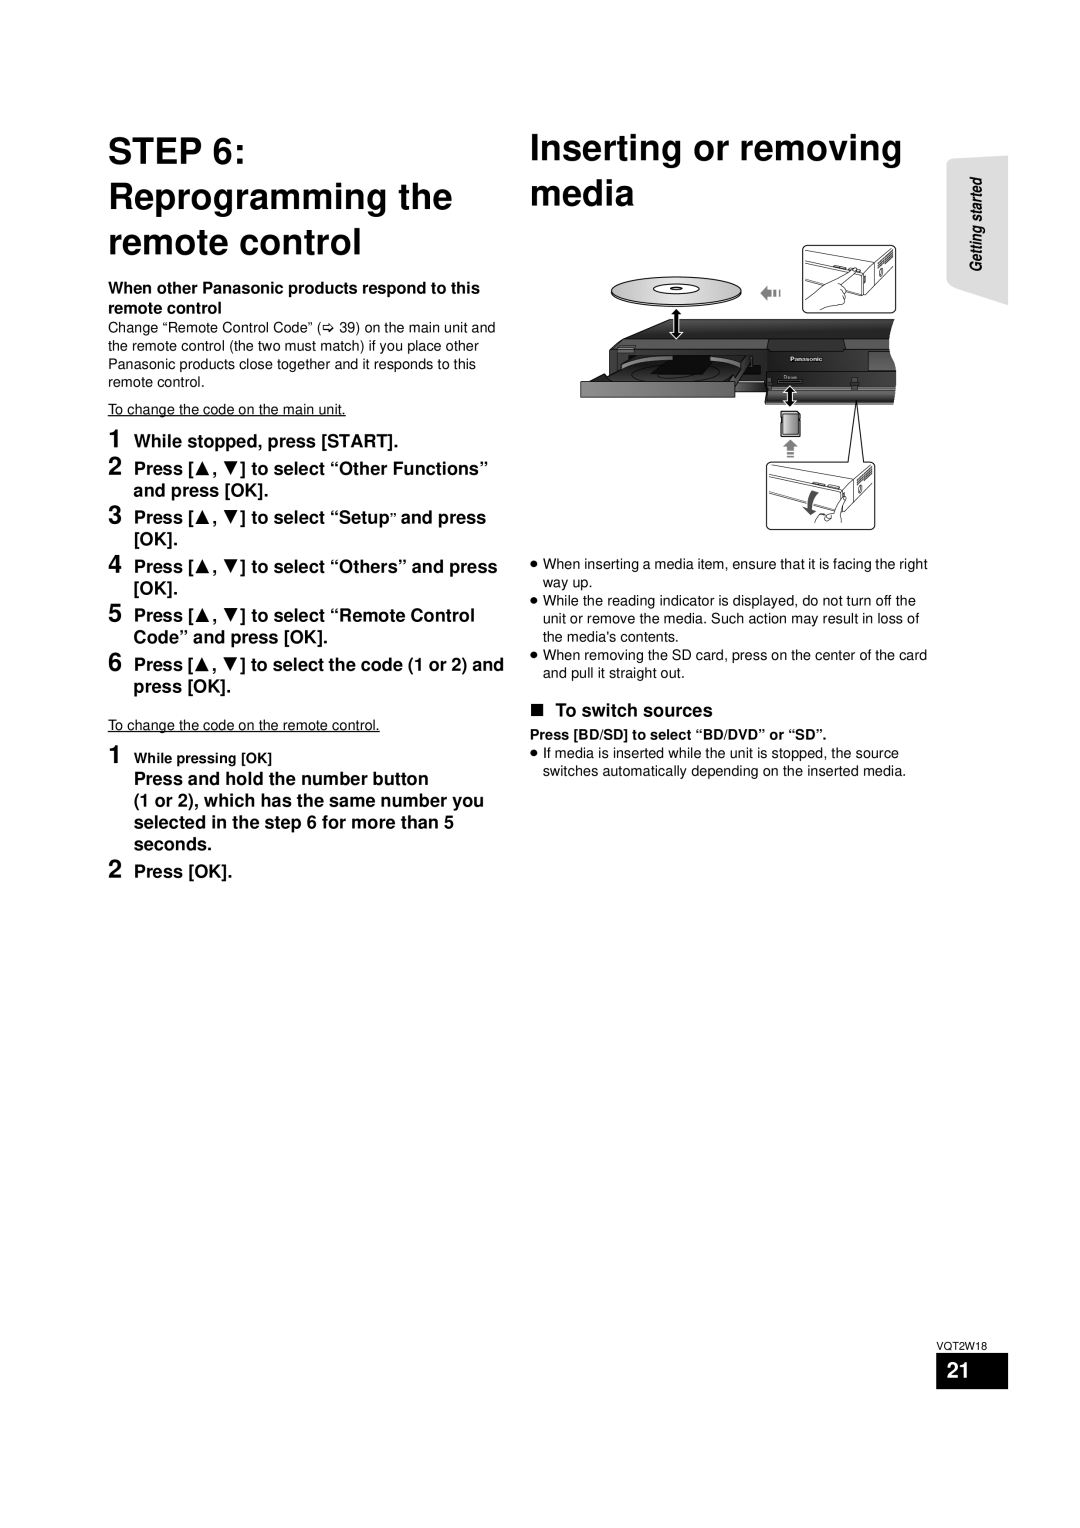 Panasonic SC-BTT750 Reprogramming the remote control, Inserting or removing media, While stopped, press START, Press OK 